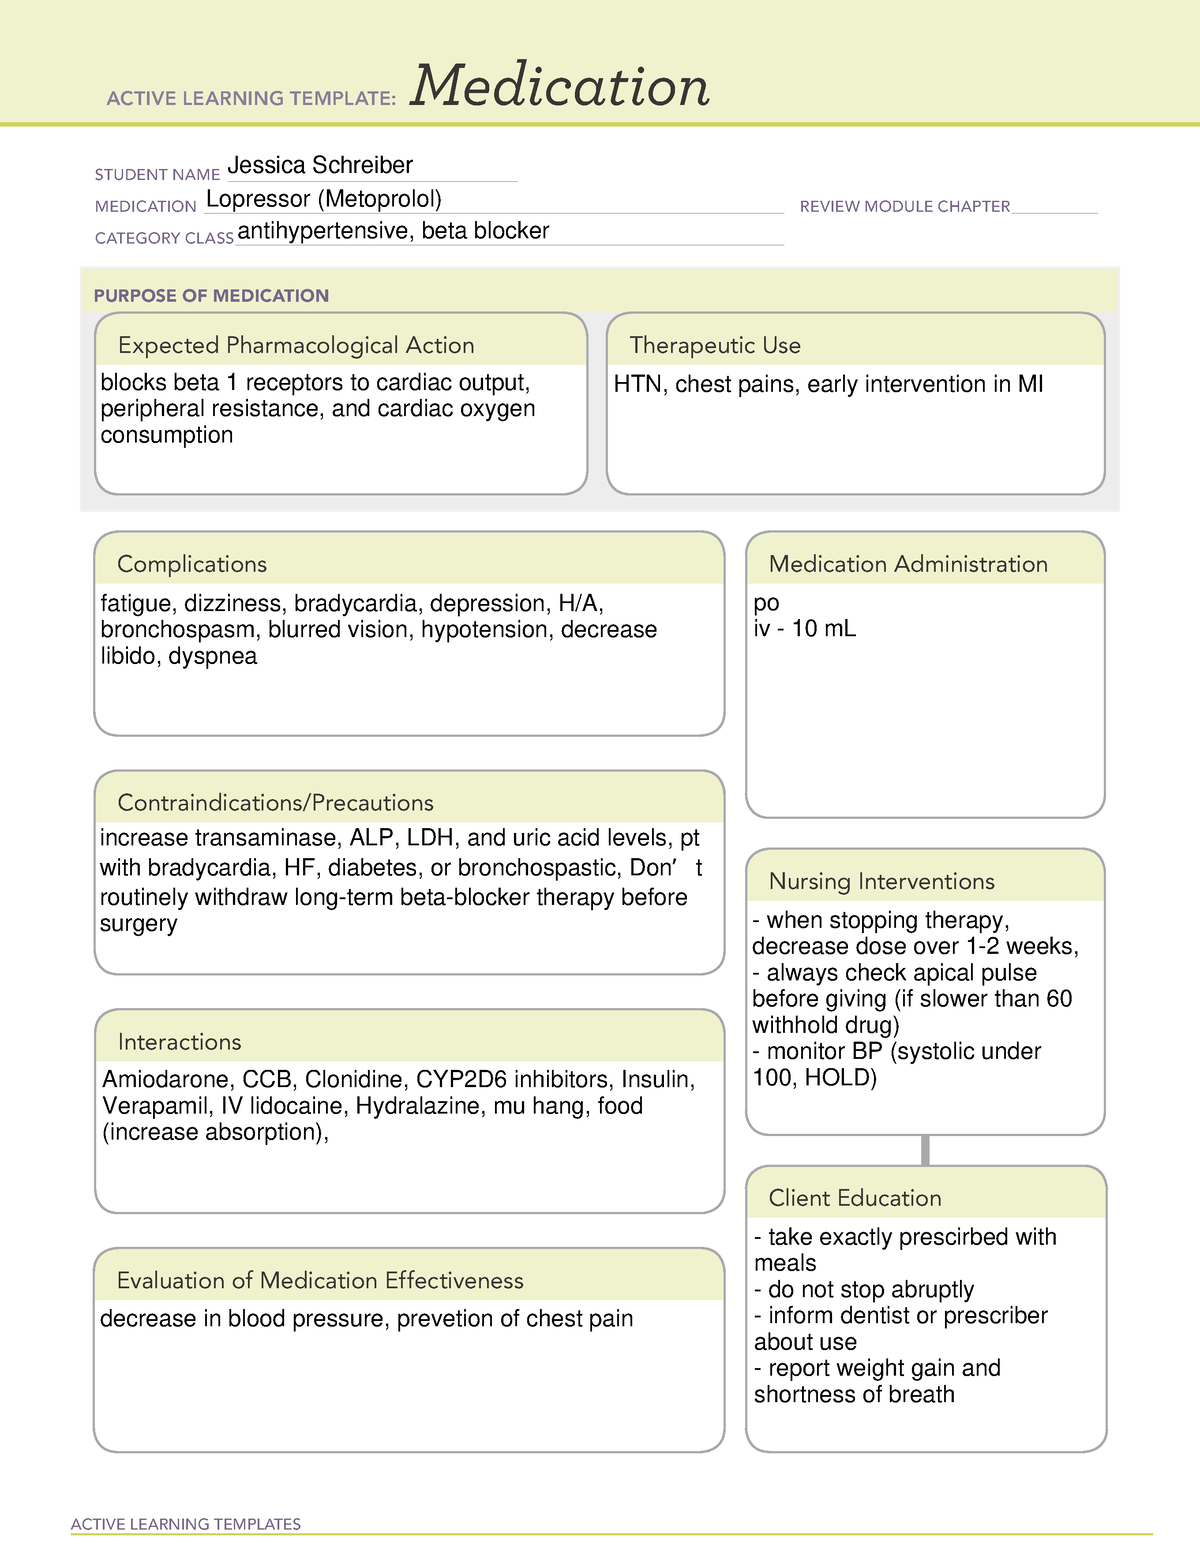 Lopressor (metoprolol) med sheet ATI ACTIVE LEARNING TEMPLATES